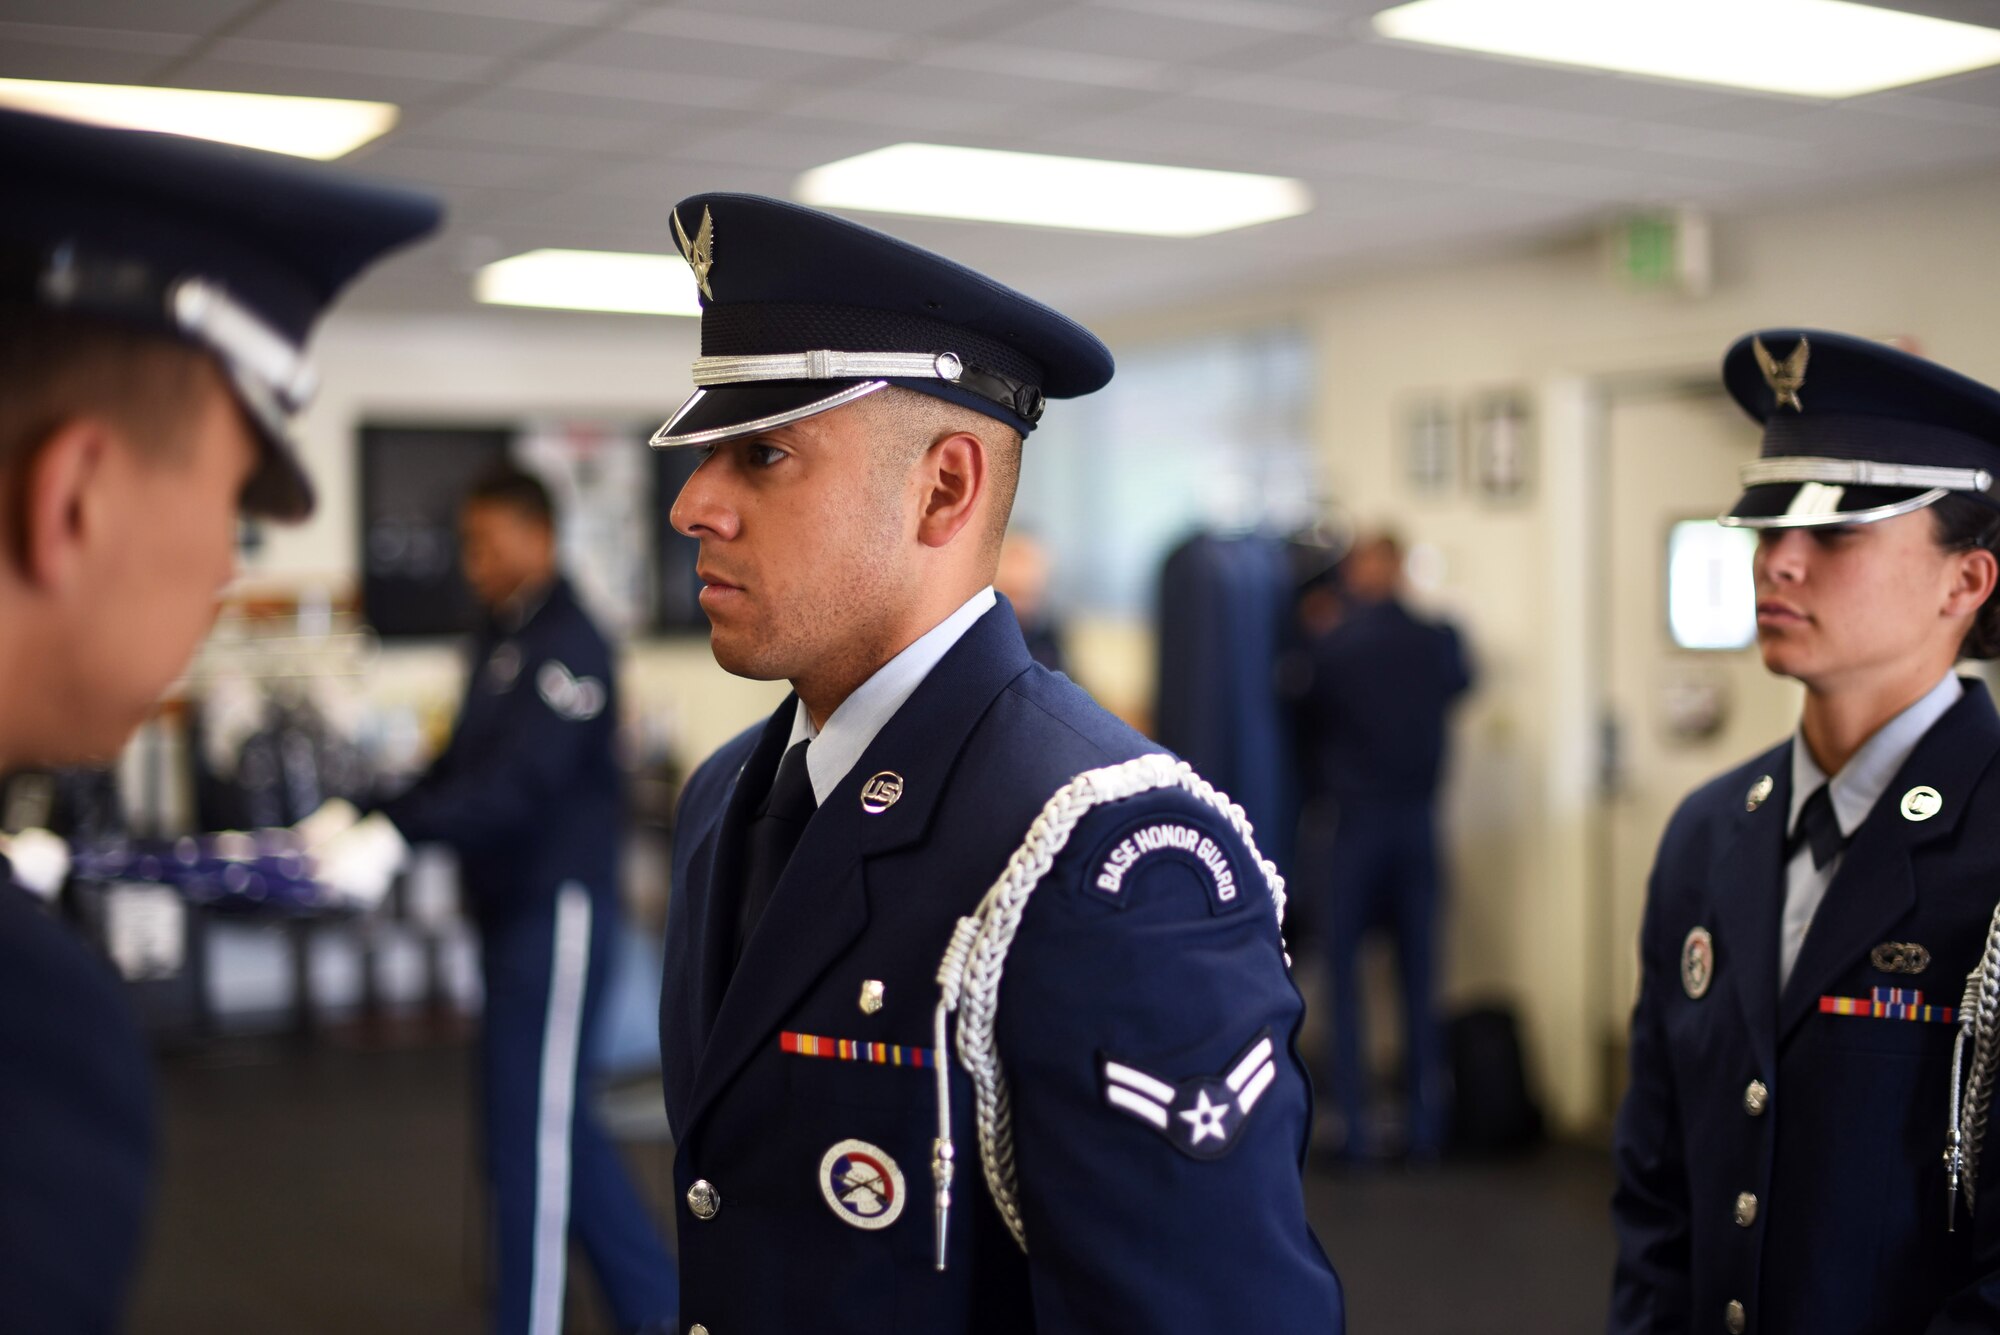 U.S. Air Force Staff Sgt. Steven C. Flynn, Travis Air Force Base Honor Guard lead instructor, inspects the ceremonial uniform of Airman First Class Mario Hernandez, 60th Medical Operations Squadron aerospace medical technician, May 22, 2018, at the Honor Guard building at Travis AFB, Calif. The Travis Honor Guard's area of responsibility spans 45,000 square miles serving 28 counties with 1 million veteran residents.  (U.S. Air Force photo by Airman 1st Class Jonathon D. A. Carnell)